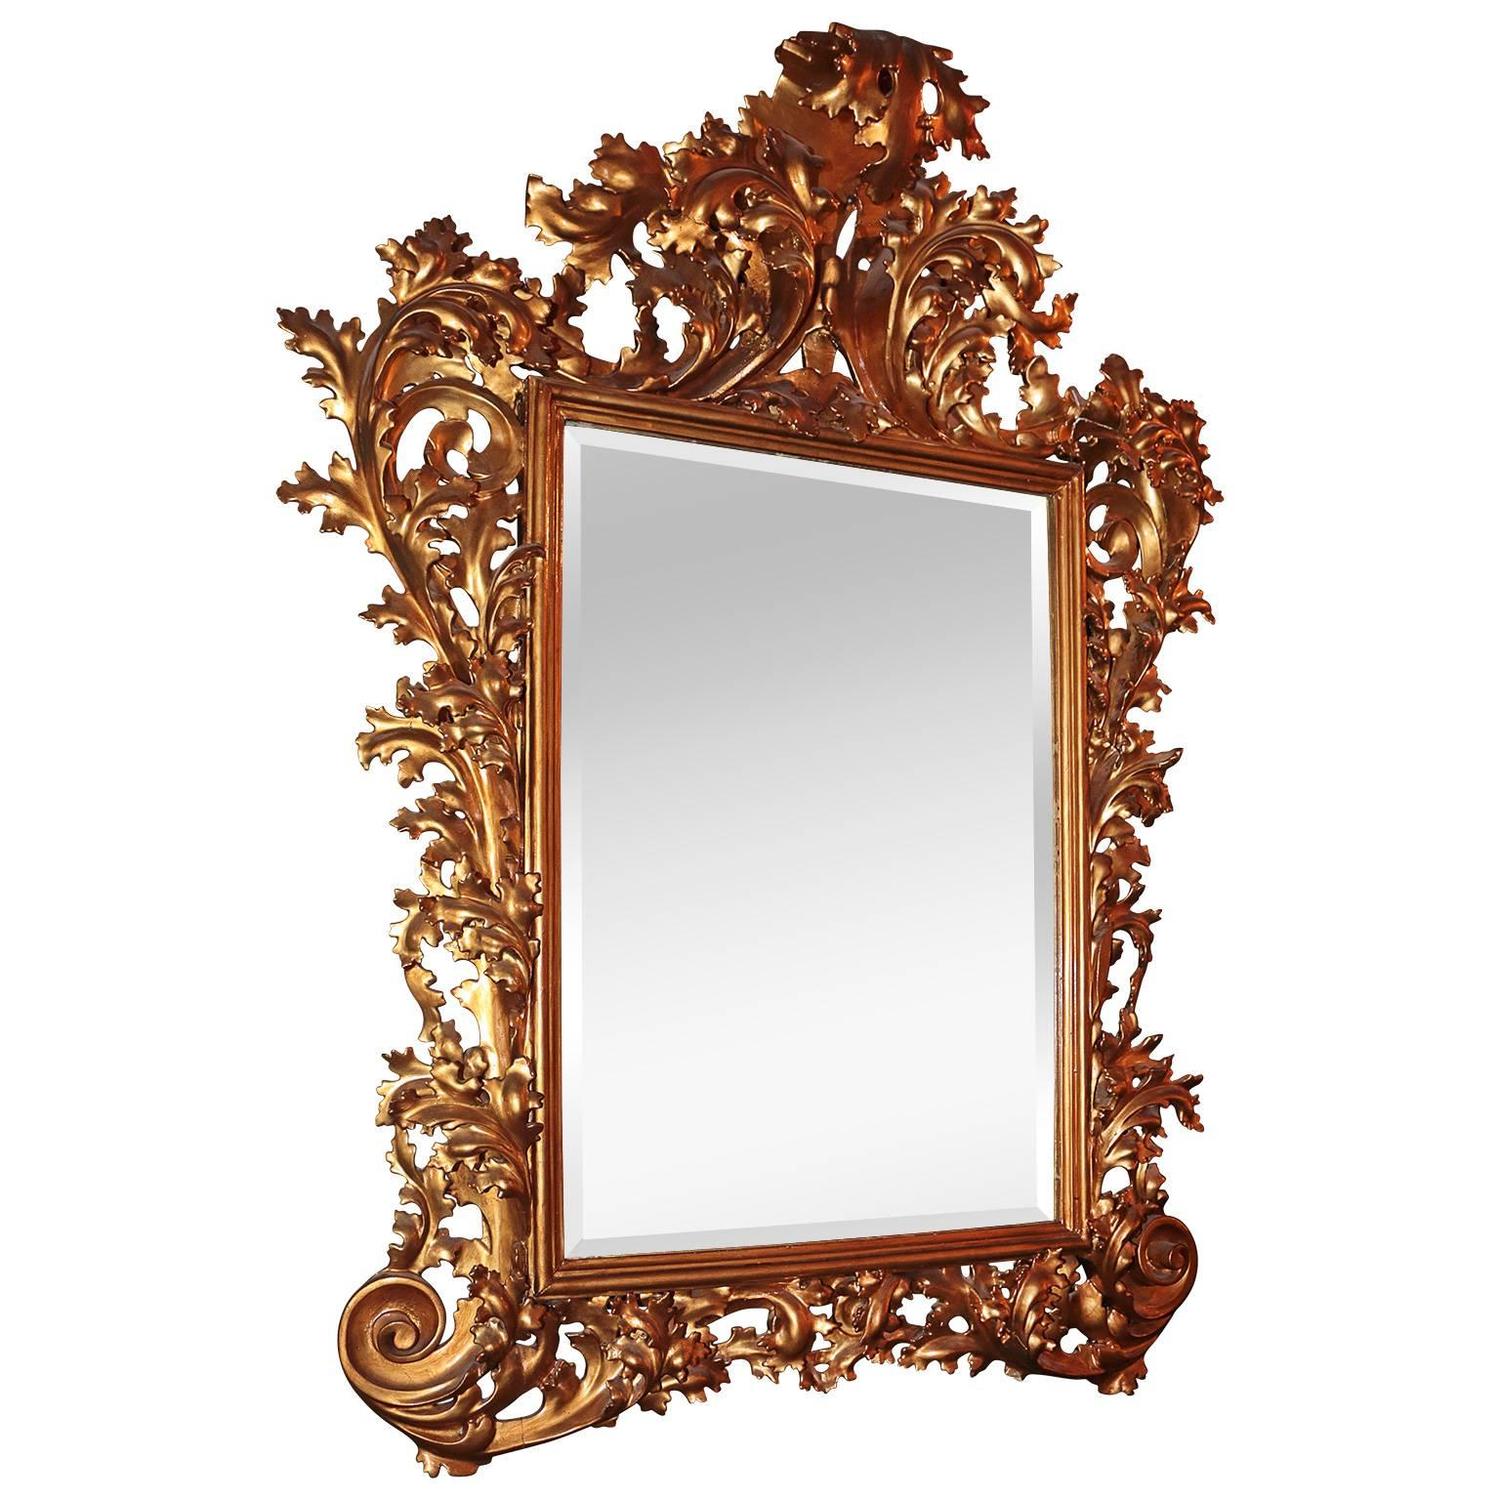 19th Century, French Gilded Rococo Wall Mirror For Sale at 1stdibs